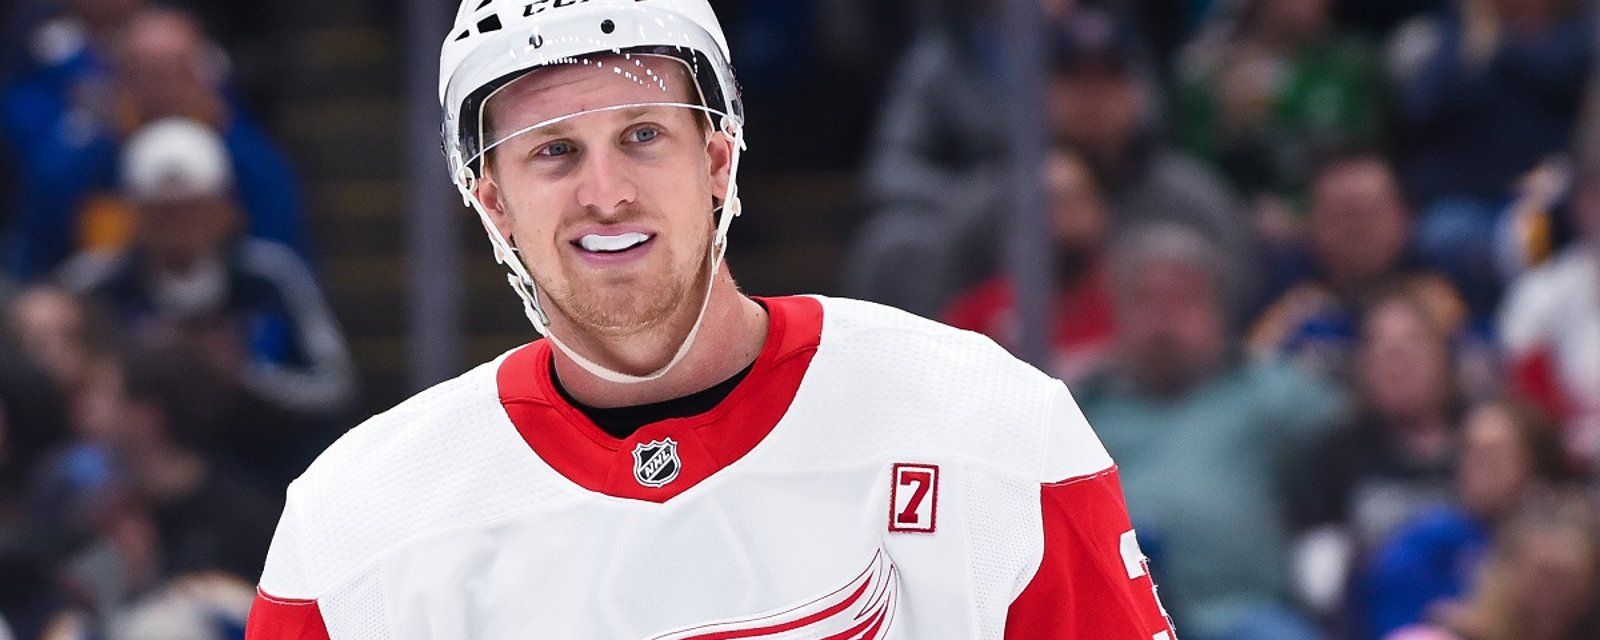 Anthony Mantha goes beast mode with 4 goals against the Dallas Stars.